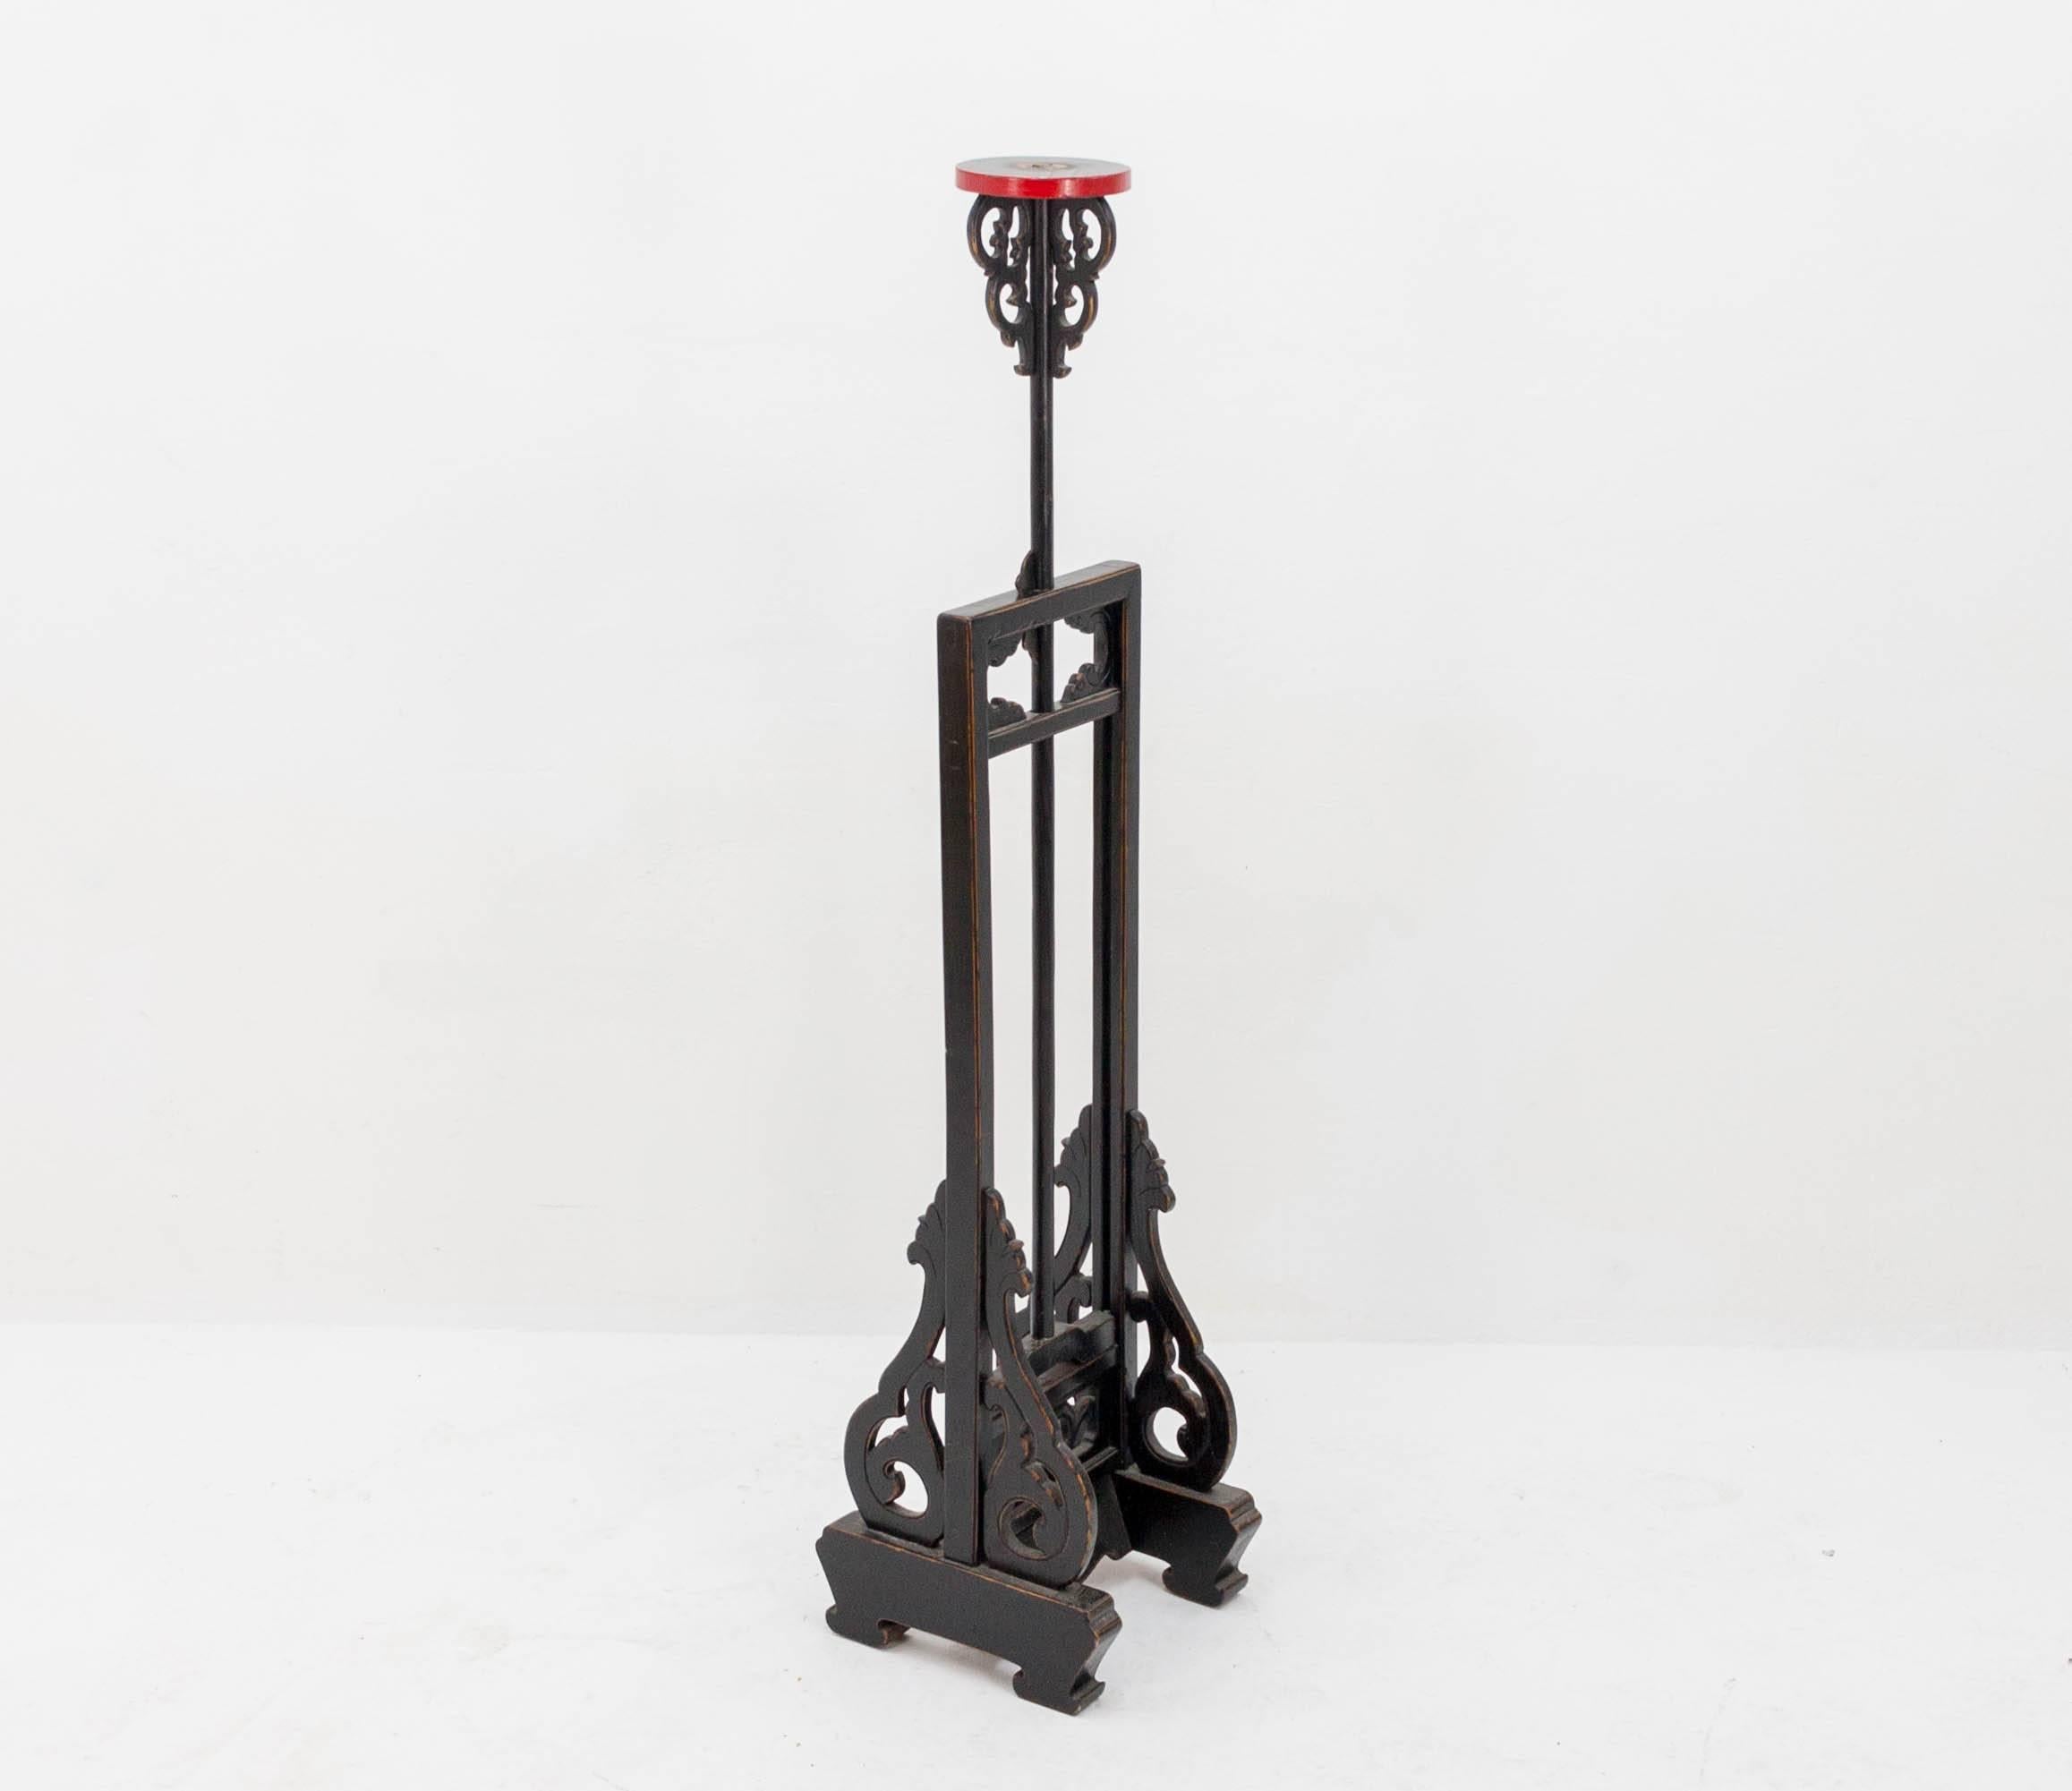 Elegant 19th century Chinese lantern stand. Height-adjustable from 140 cm all the way up to 200 cm.